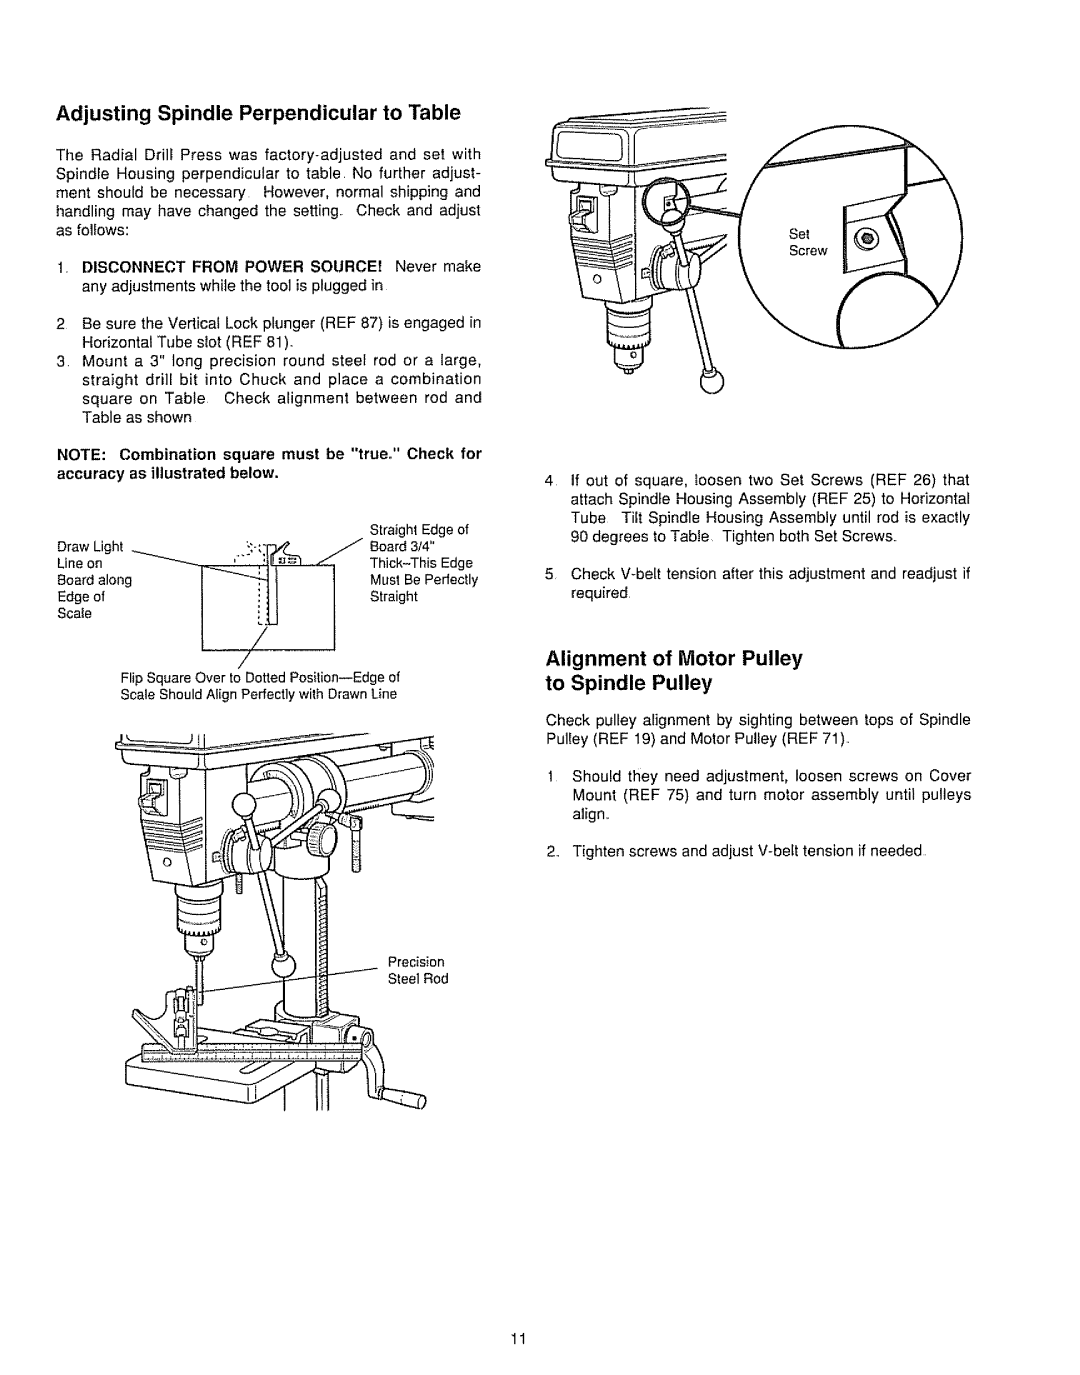 Sears 149.213340 warranty Adjusting Spindle Perpendicular to Table, Alignment of Motor Pulley to Spindle Pulley 